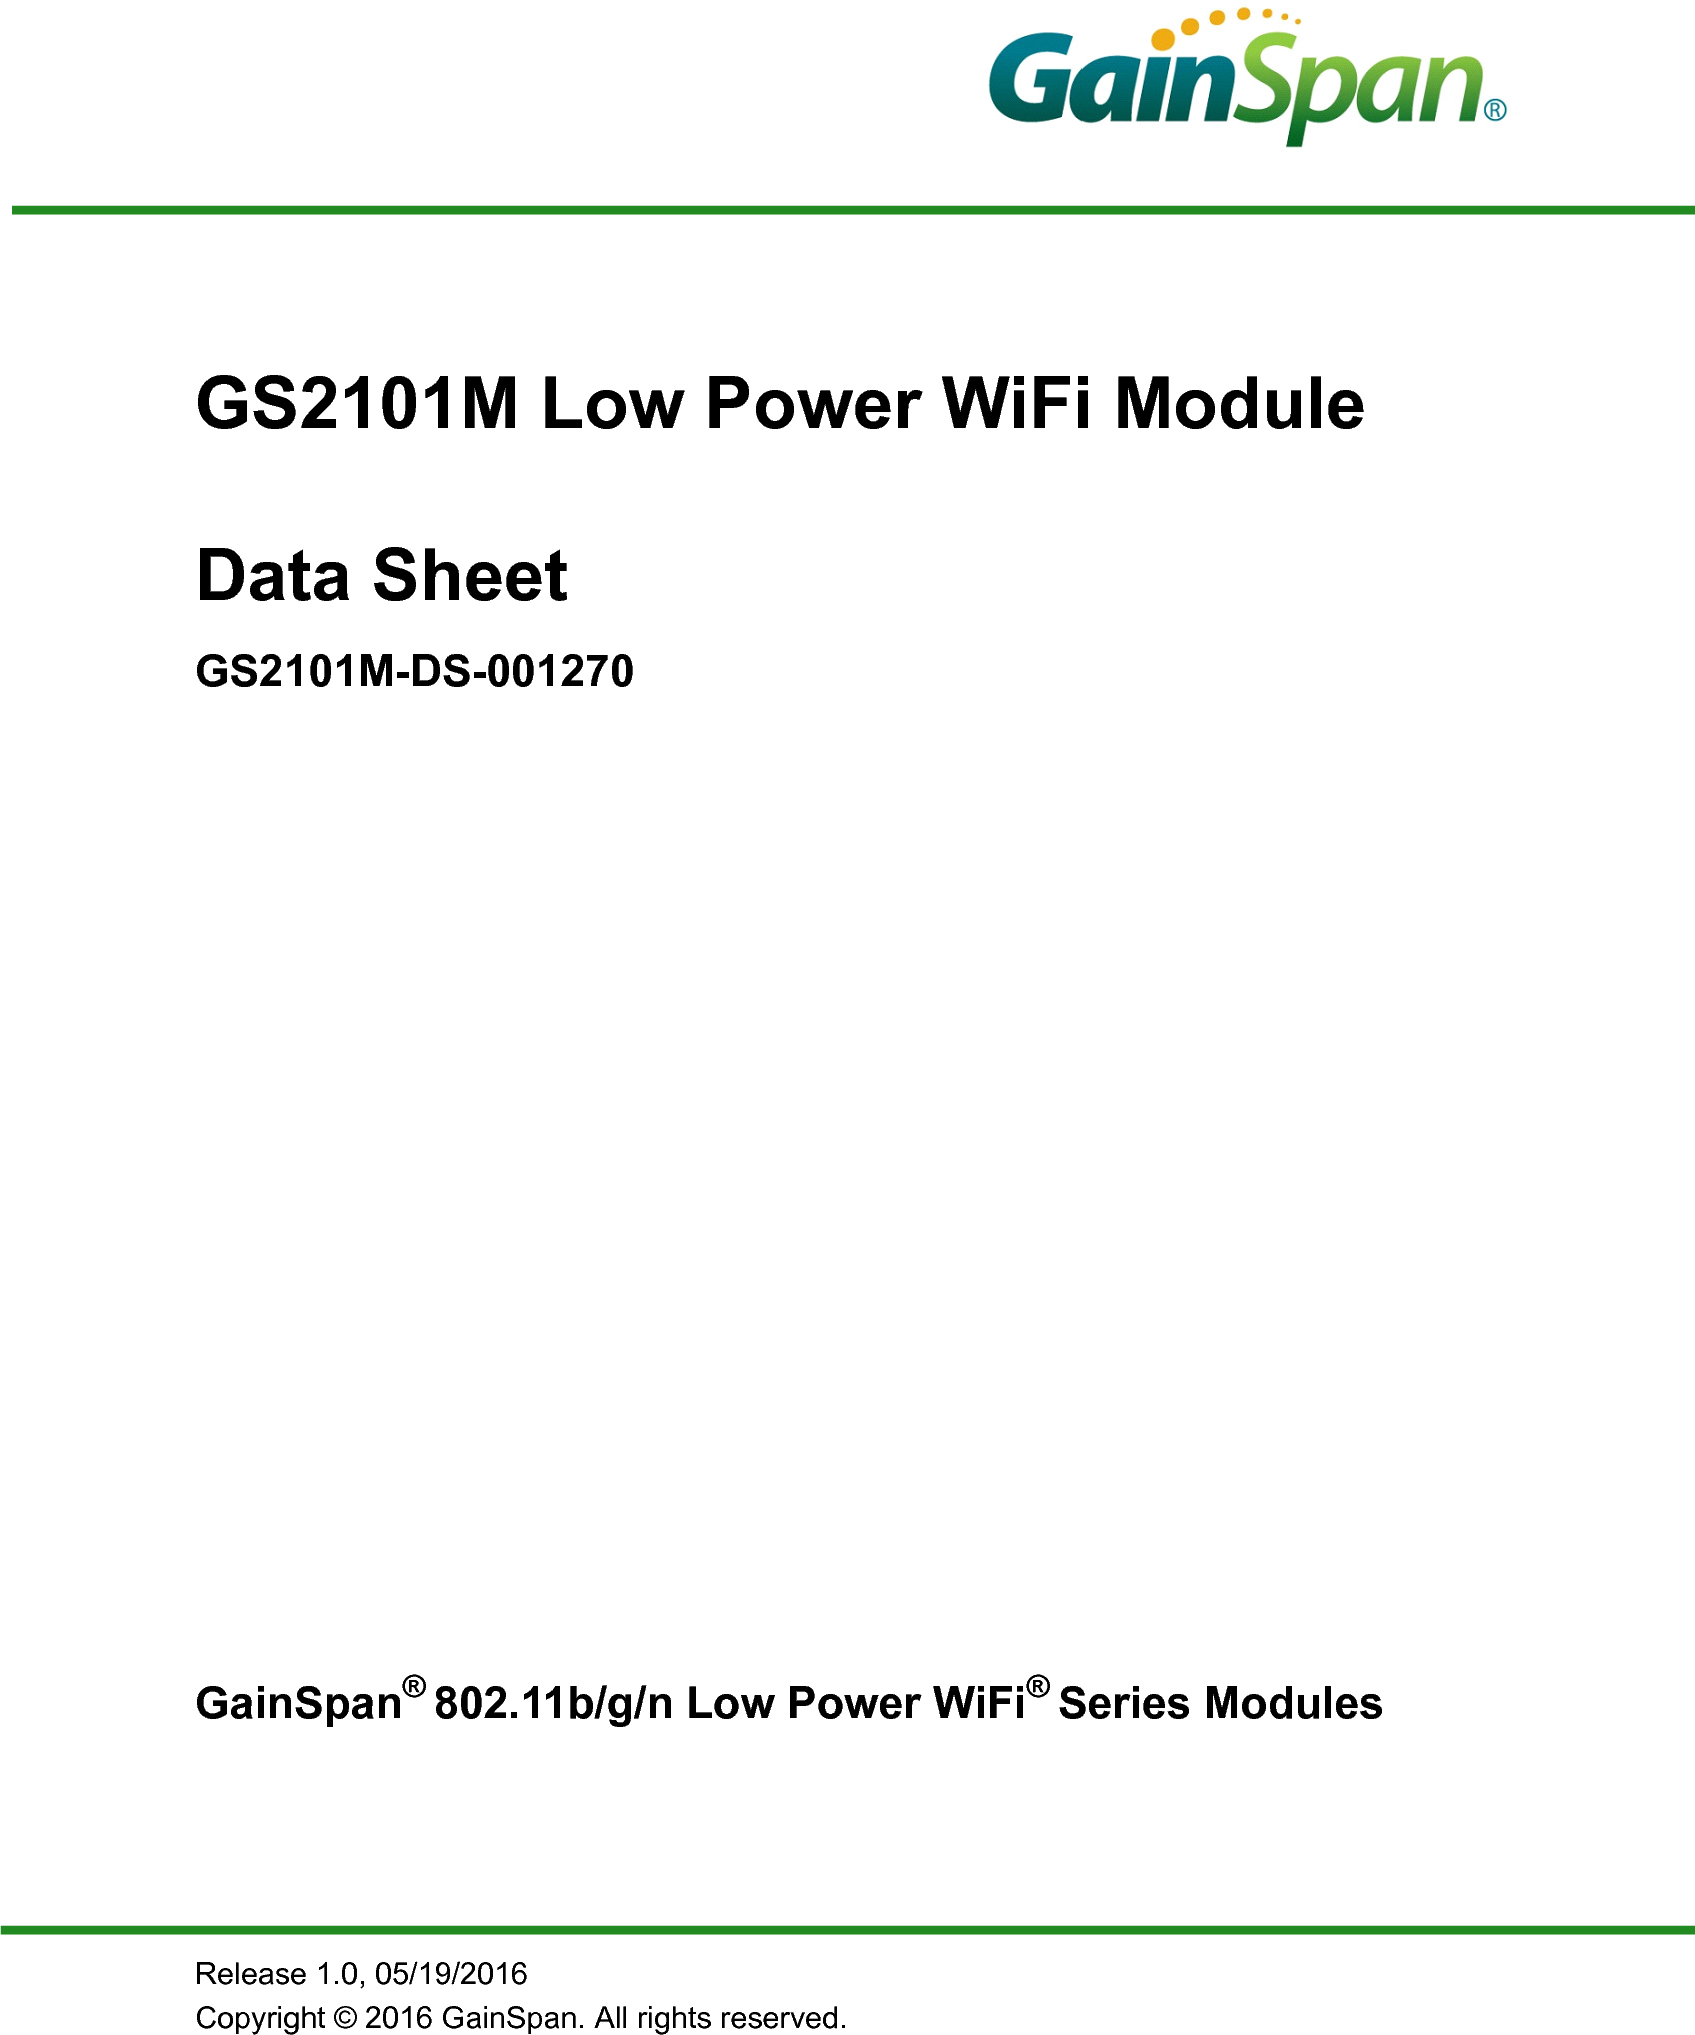 Release 1.0, 05/19/2016Copyright © 2016 GainSpan. All rights reserved.GS2101M Low Power WiFi ModuleData SheetGS2101M-DS-001270GainSpan® 802.11b/g/n Low Power WiFi® Series Modules